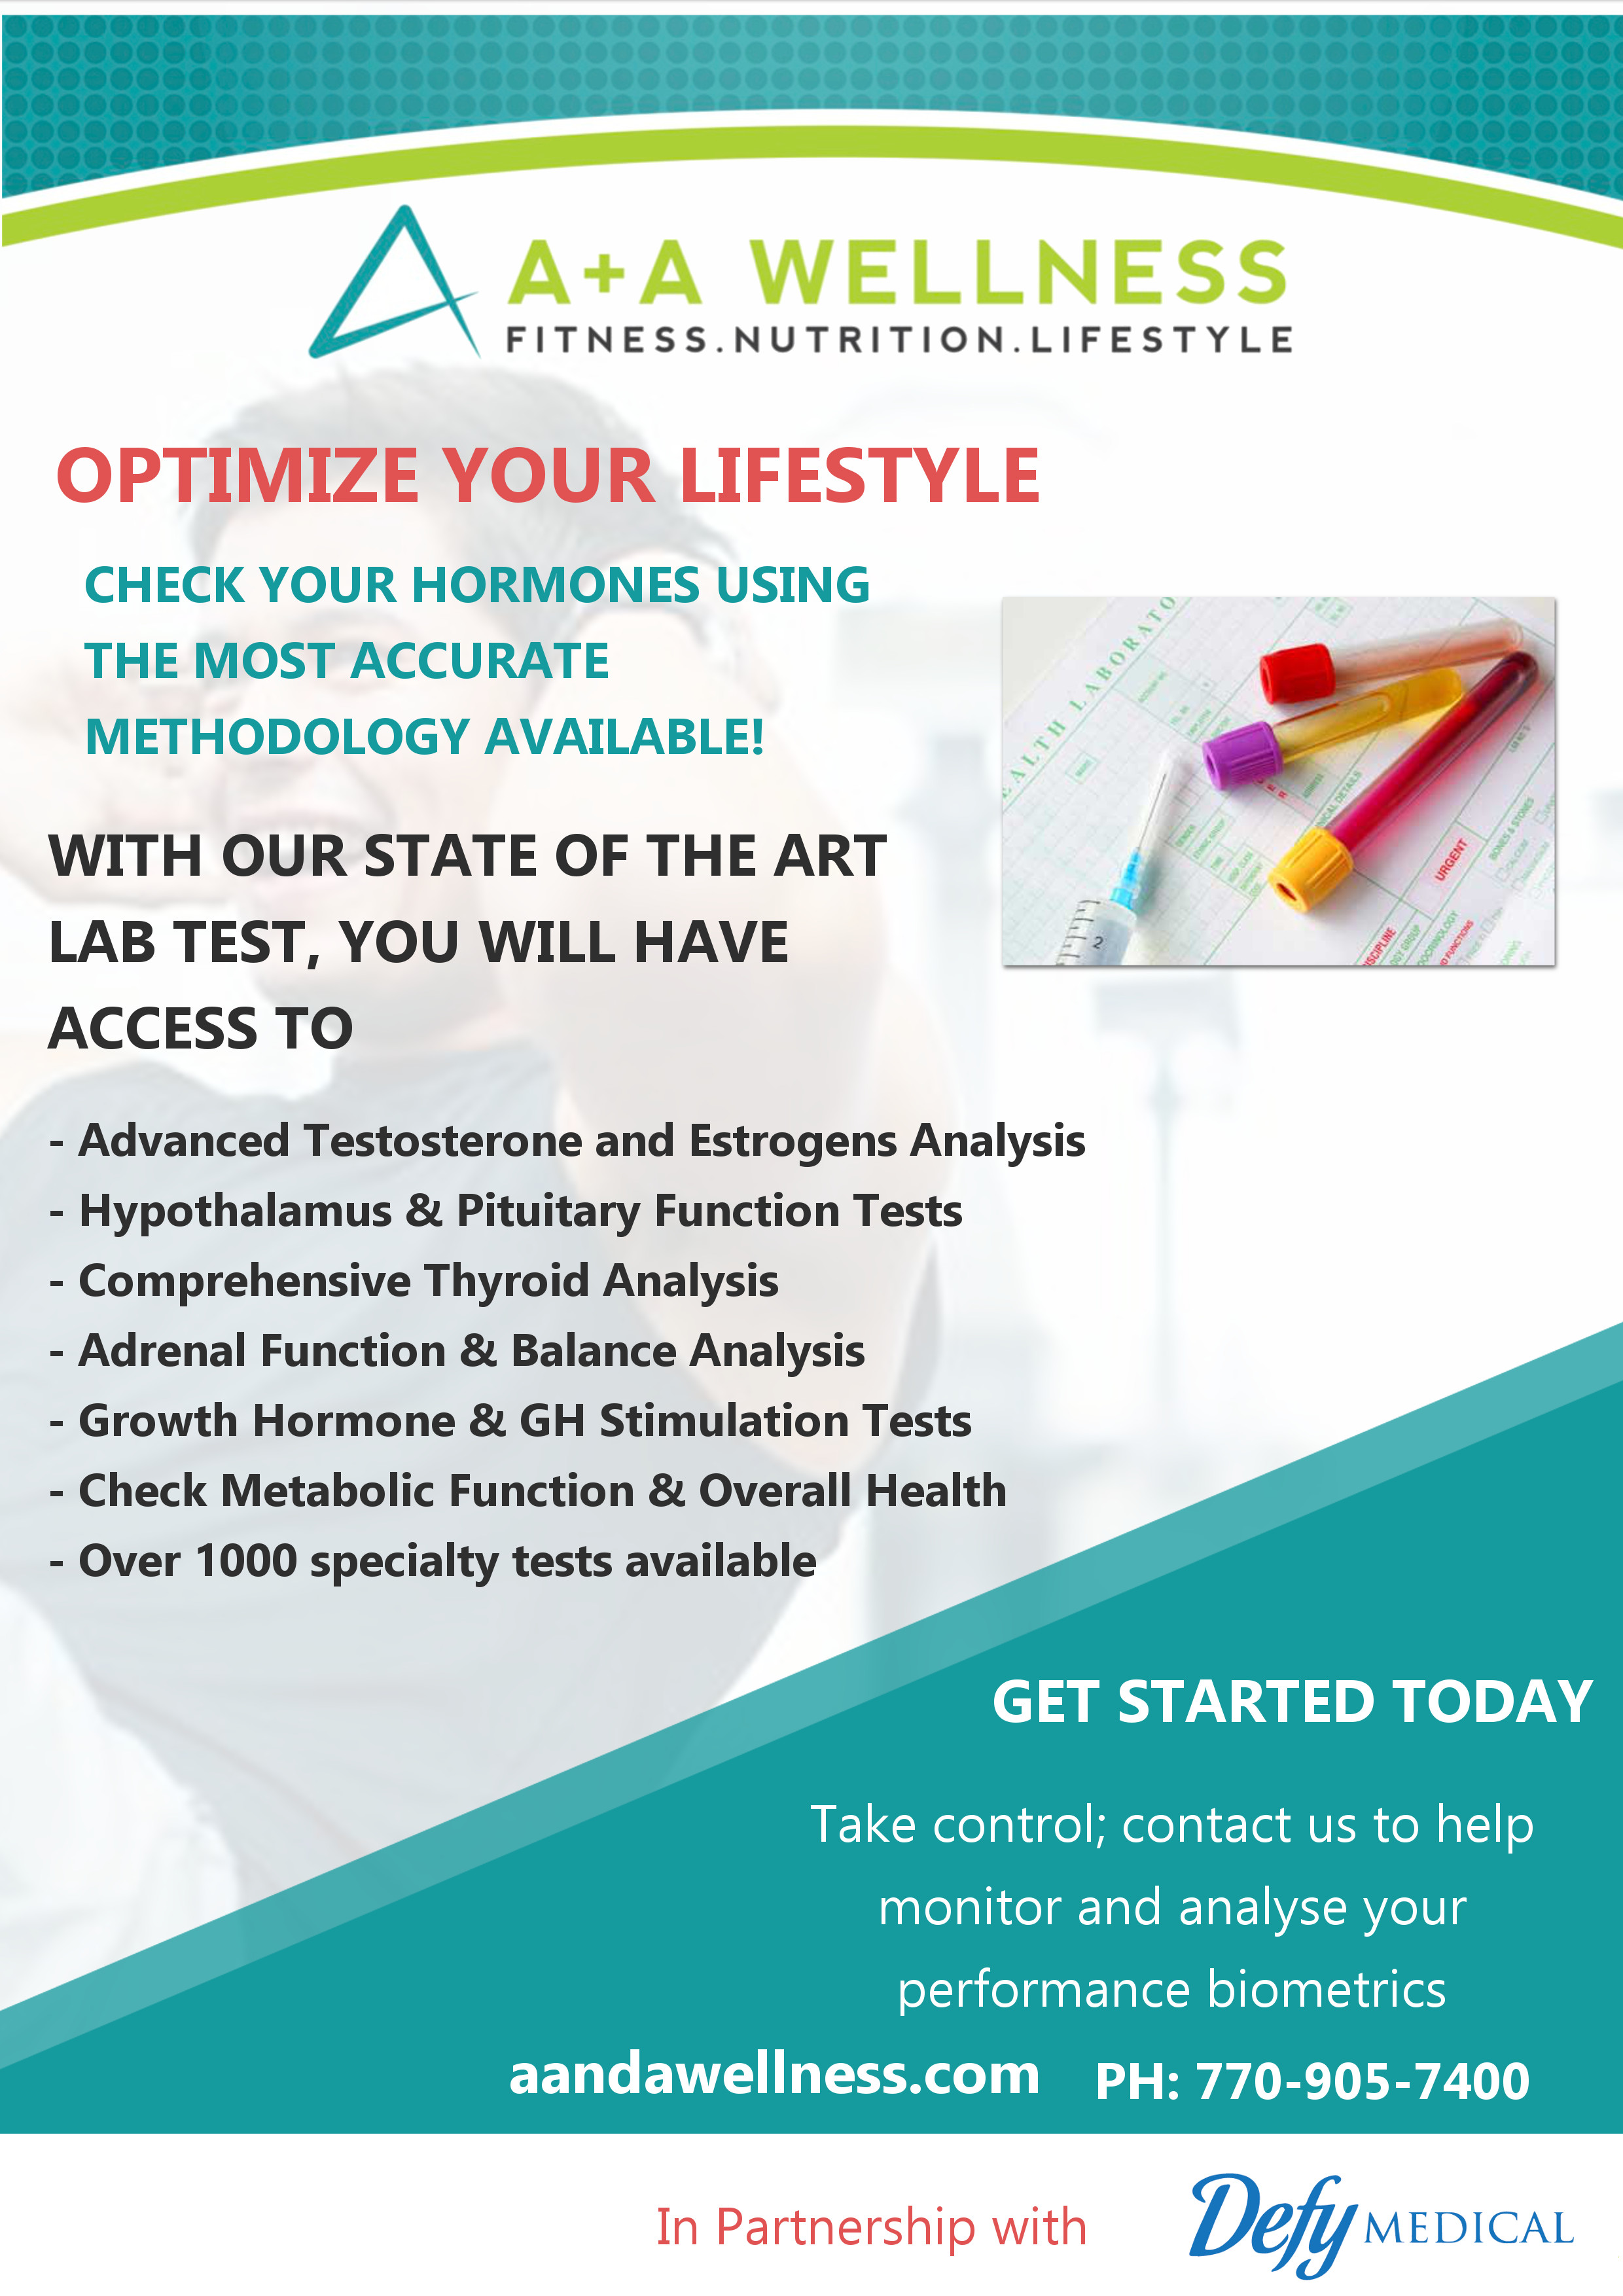 Optimize Your Lifestyle - DefyMedical and A+A Wellness Blood Tests